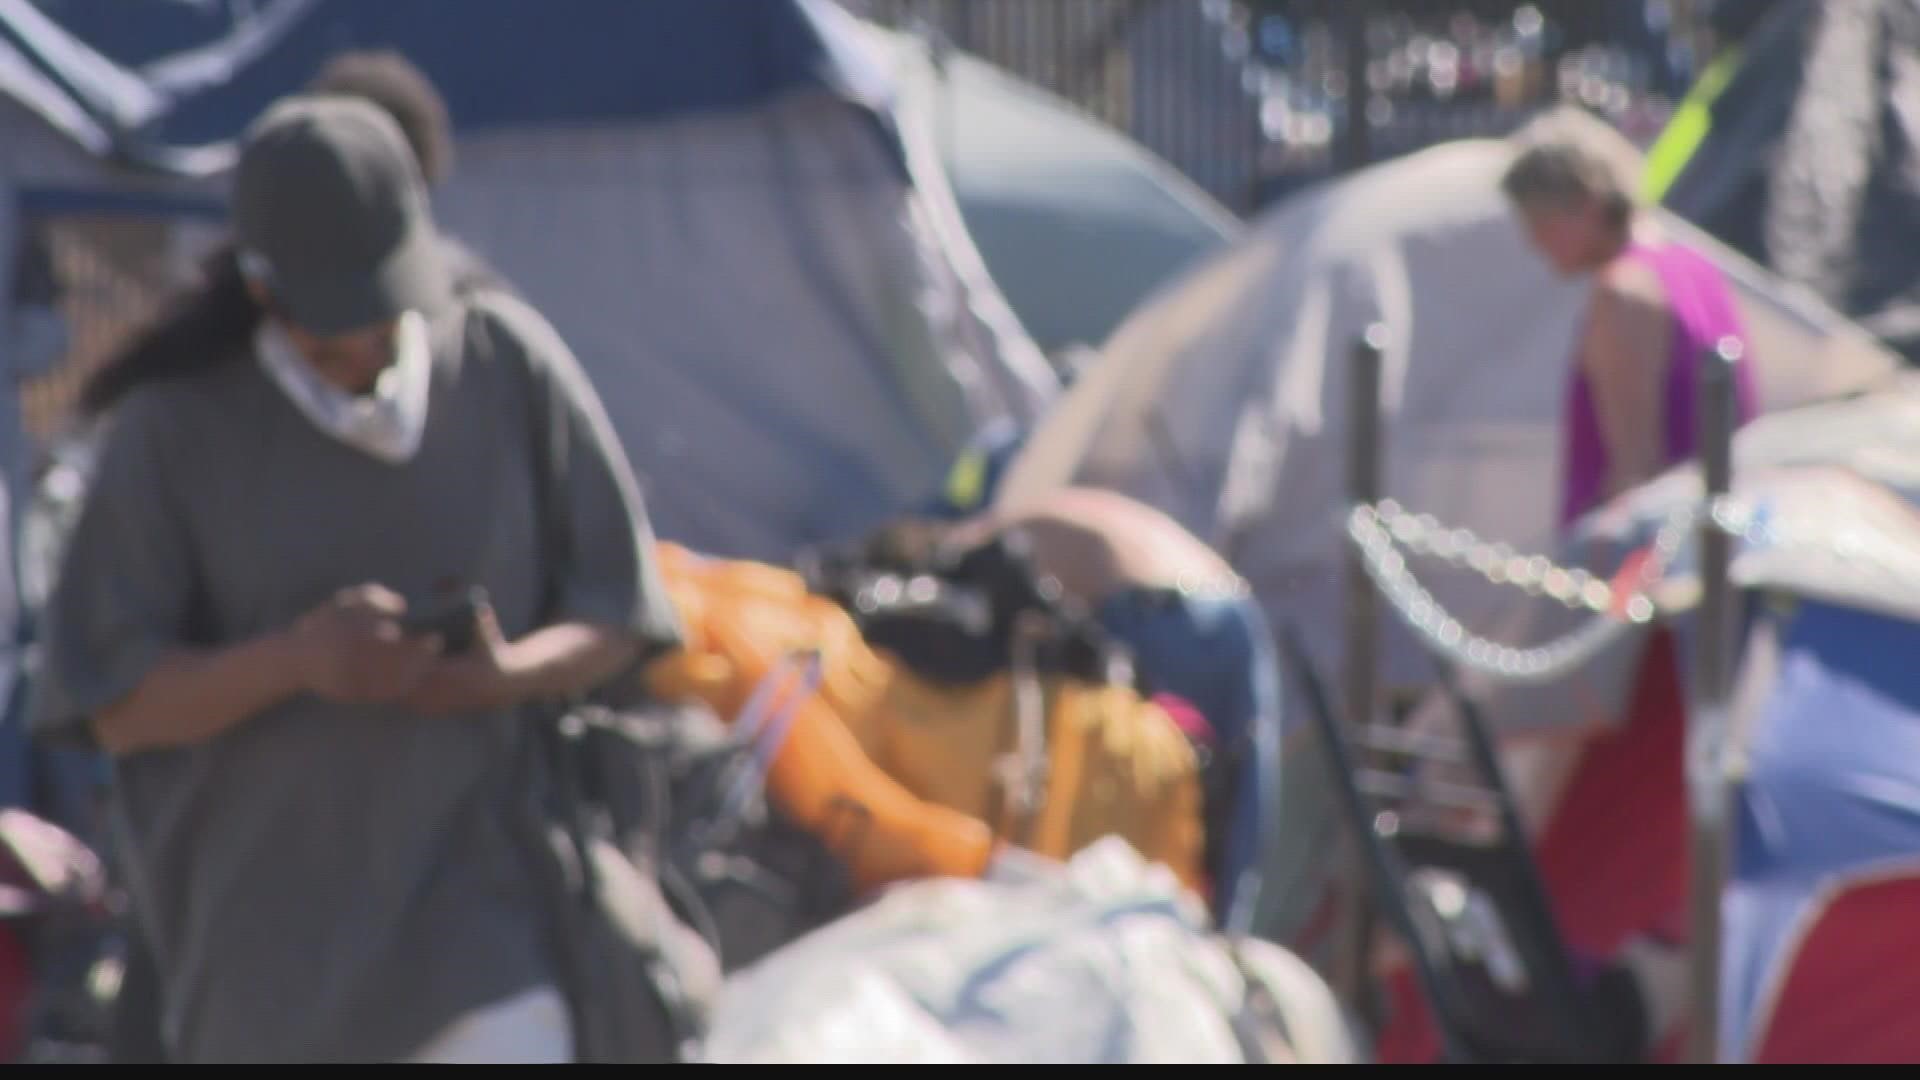 Phoenix is on pace for a record-breaking number of homeless deaths.